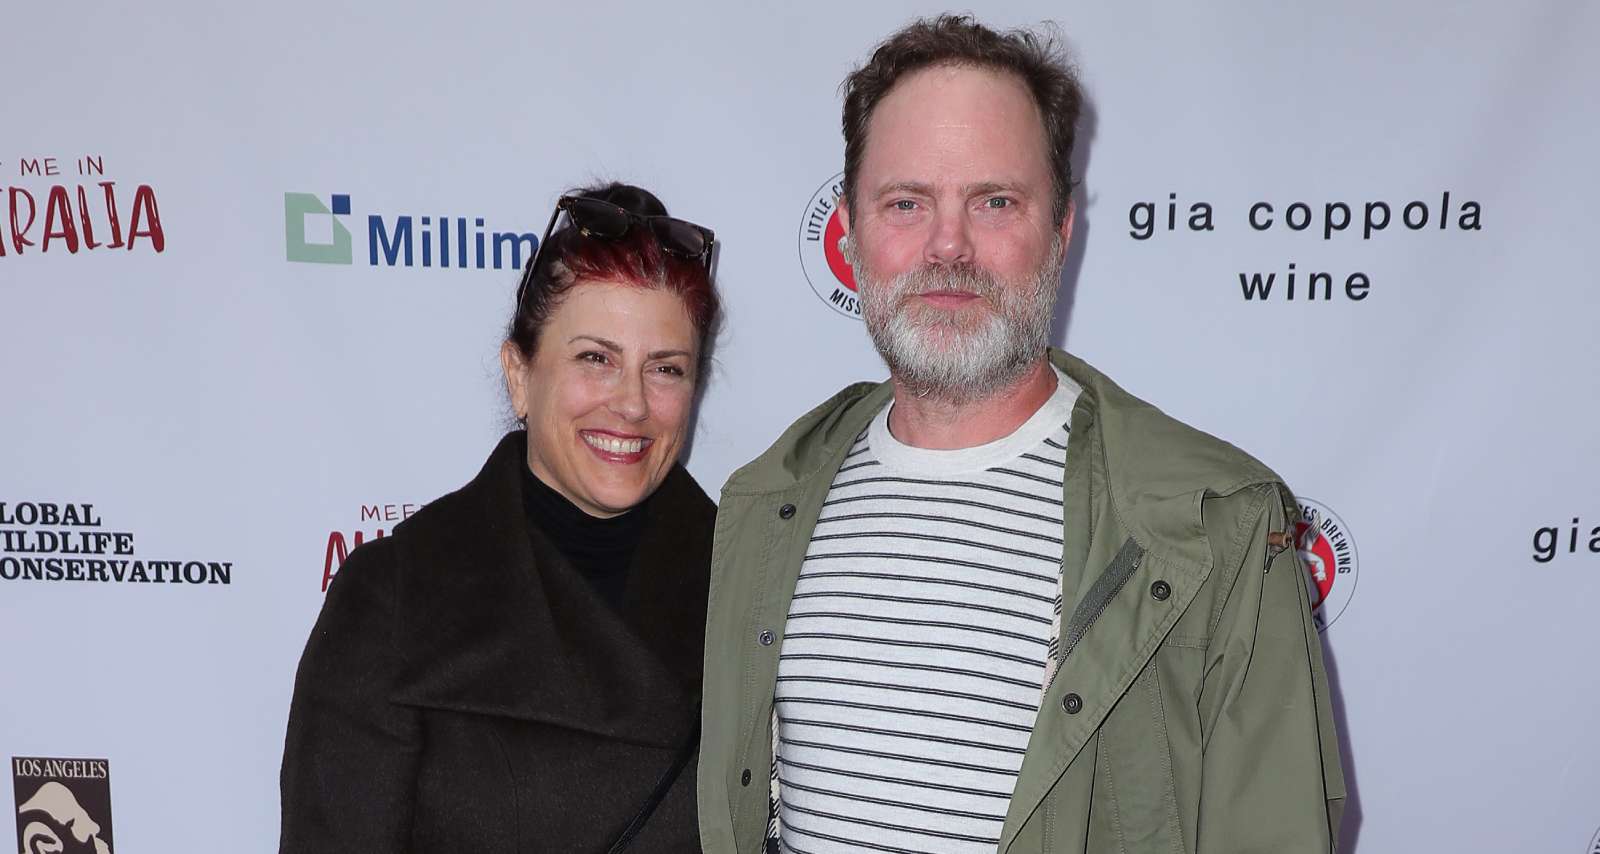 Holiday Reinhorn Wiki, Age, Son, Parents, Siblings, Family, Education, Author and Facts About Rainn Wilson’s Wife